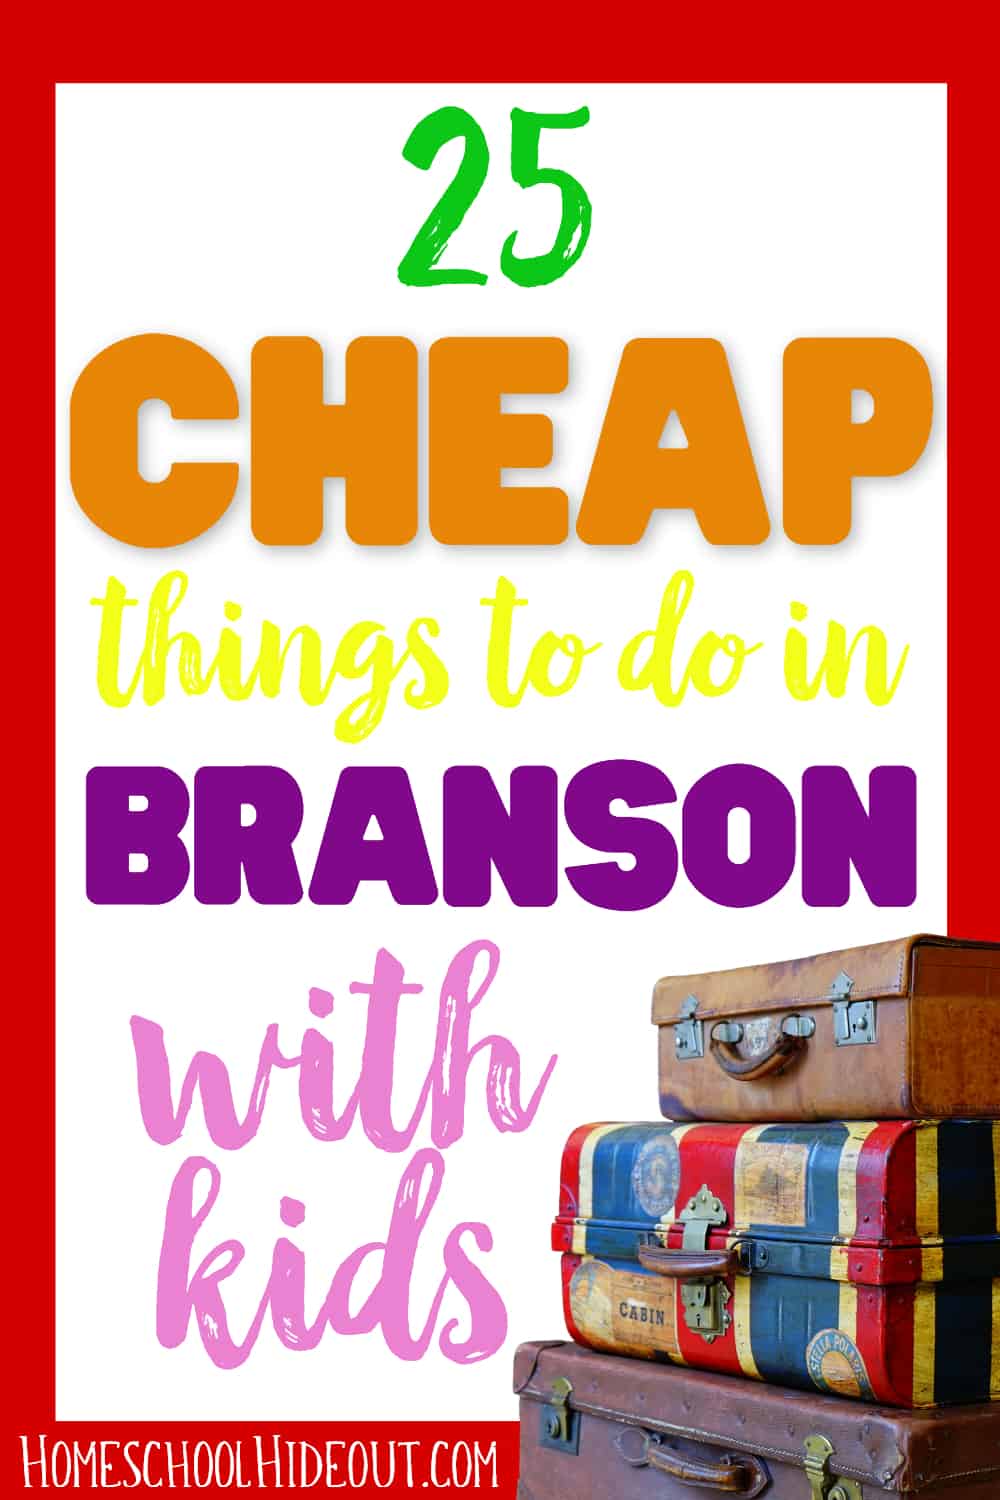 Cheap Things to do in Branson with Kids - Homeschool Hideout